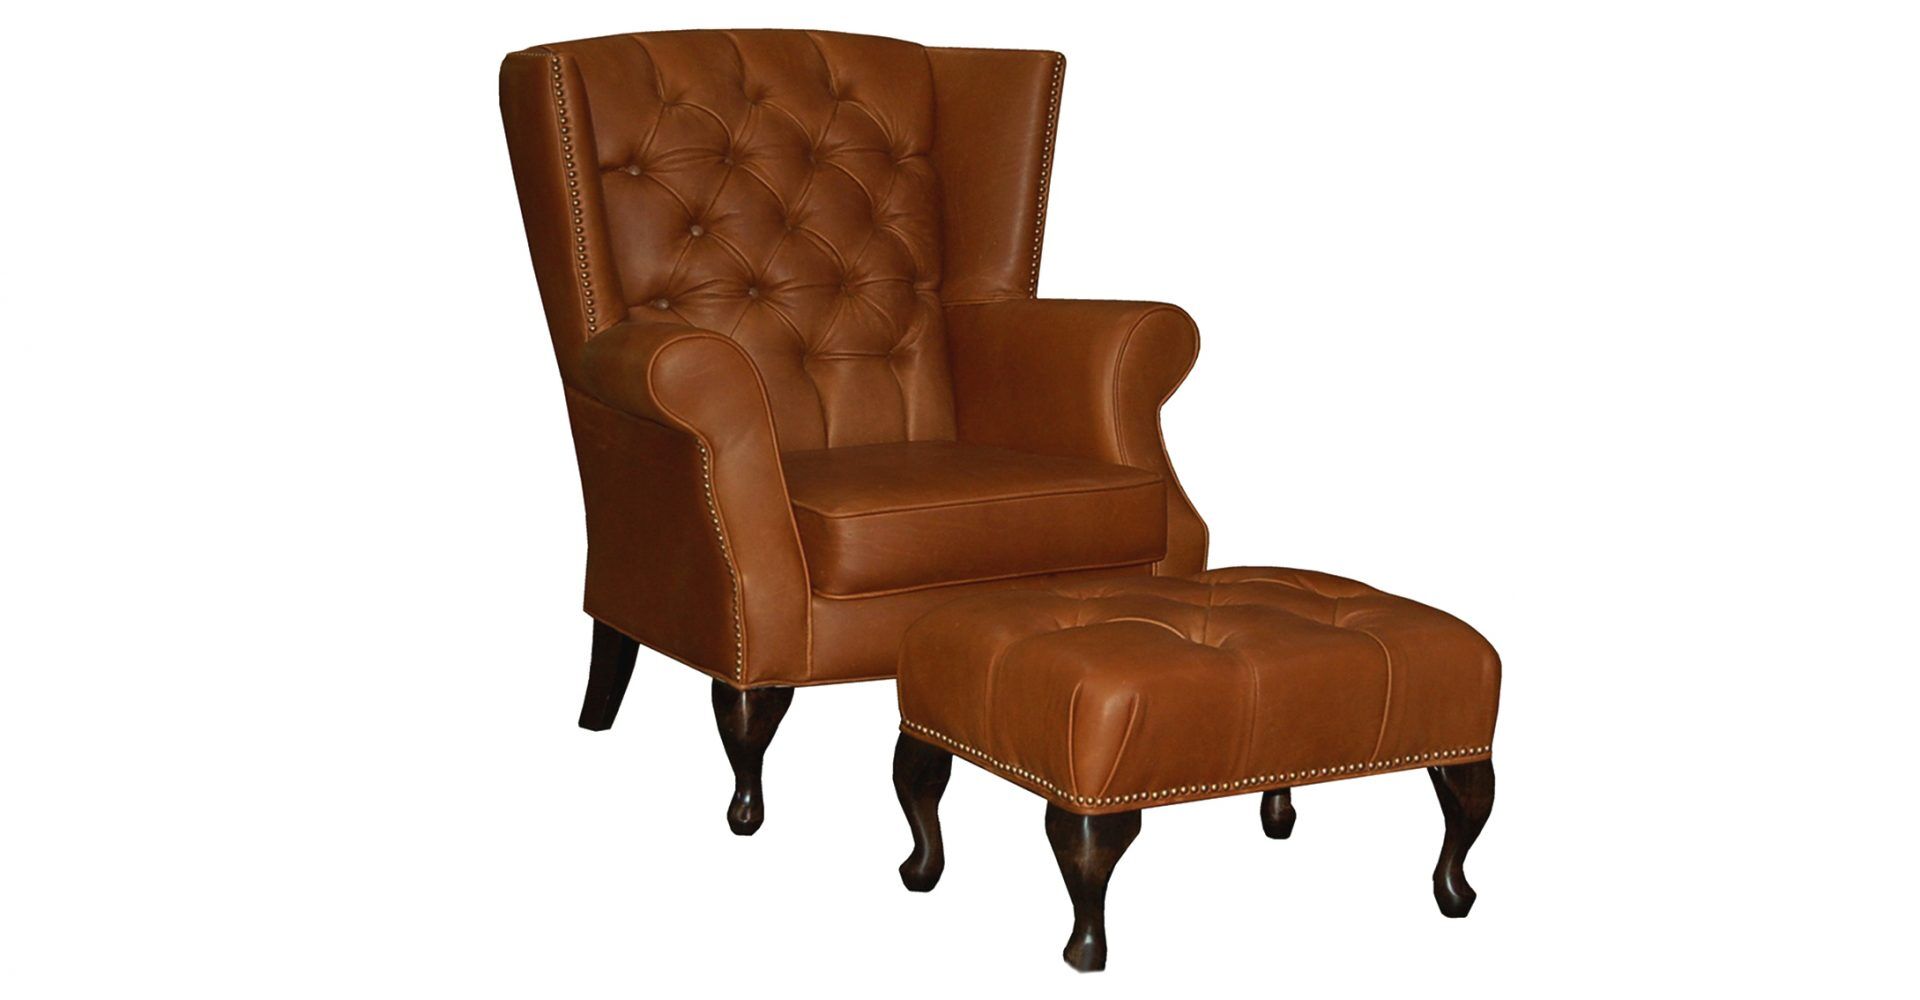 Barrel Tufted Leather Chair | Raw Home Furnishings by Rawhide